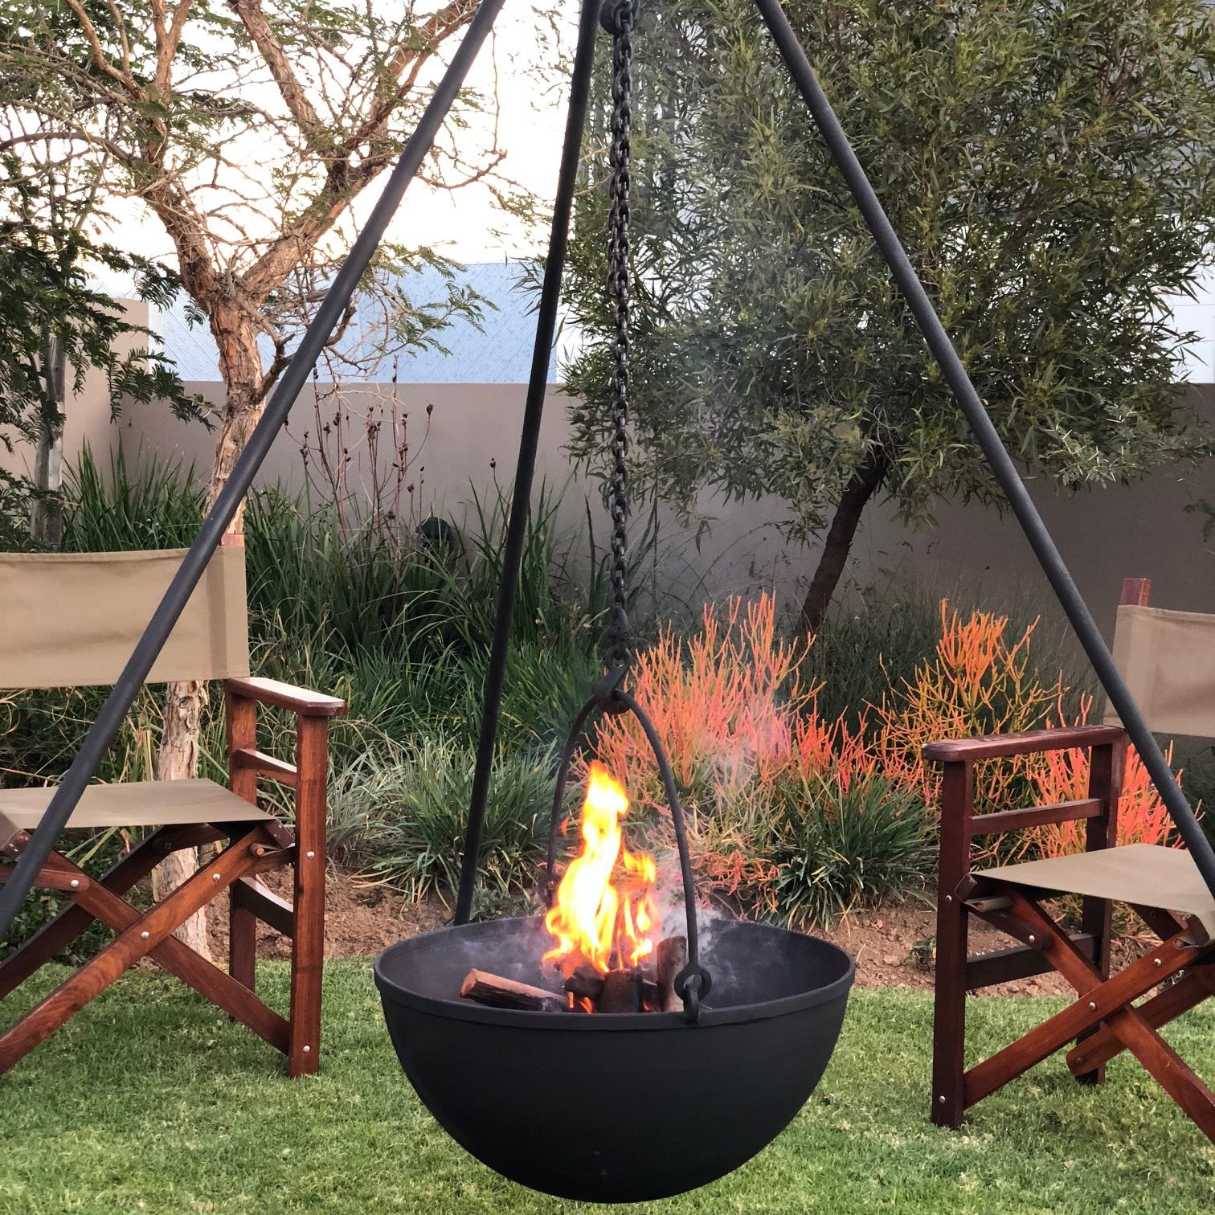 How To Make A Tripod For A Fire Pit